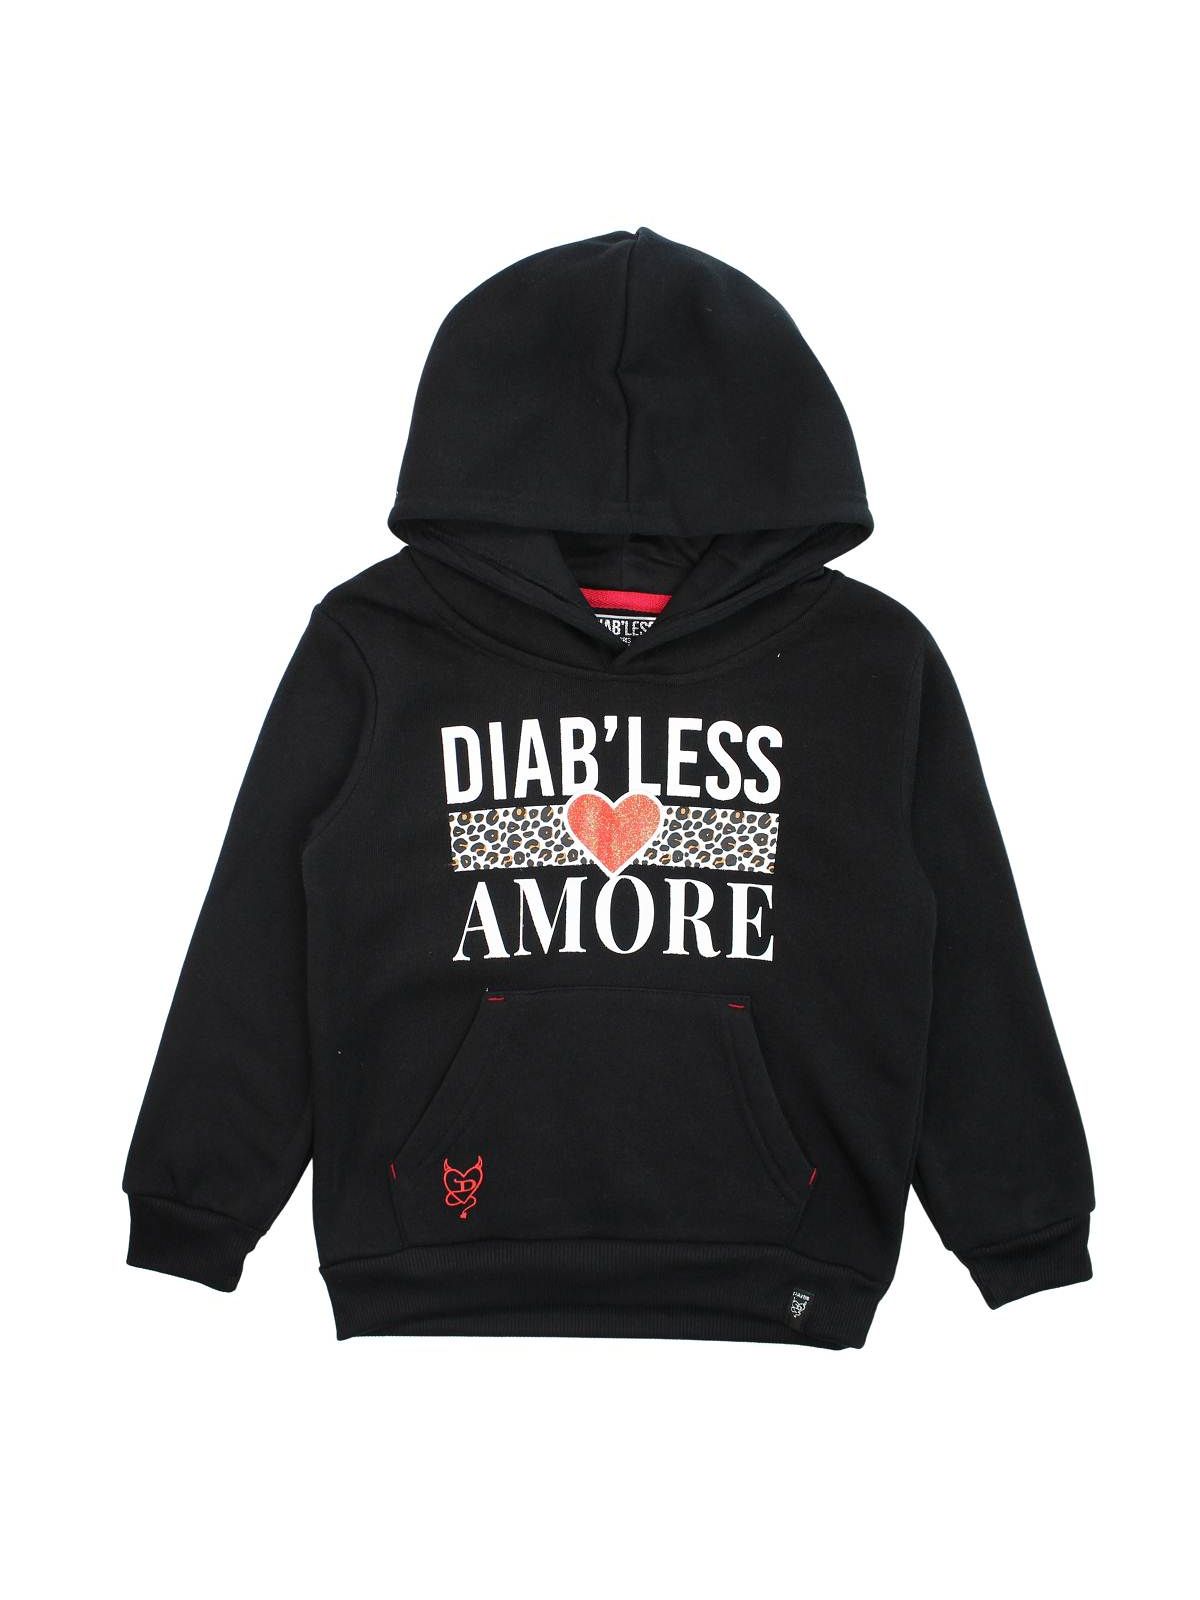 Diabless Sweater